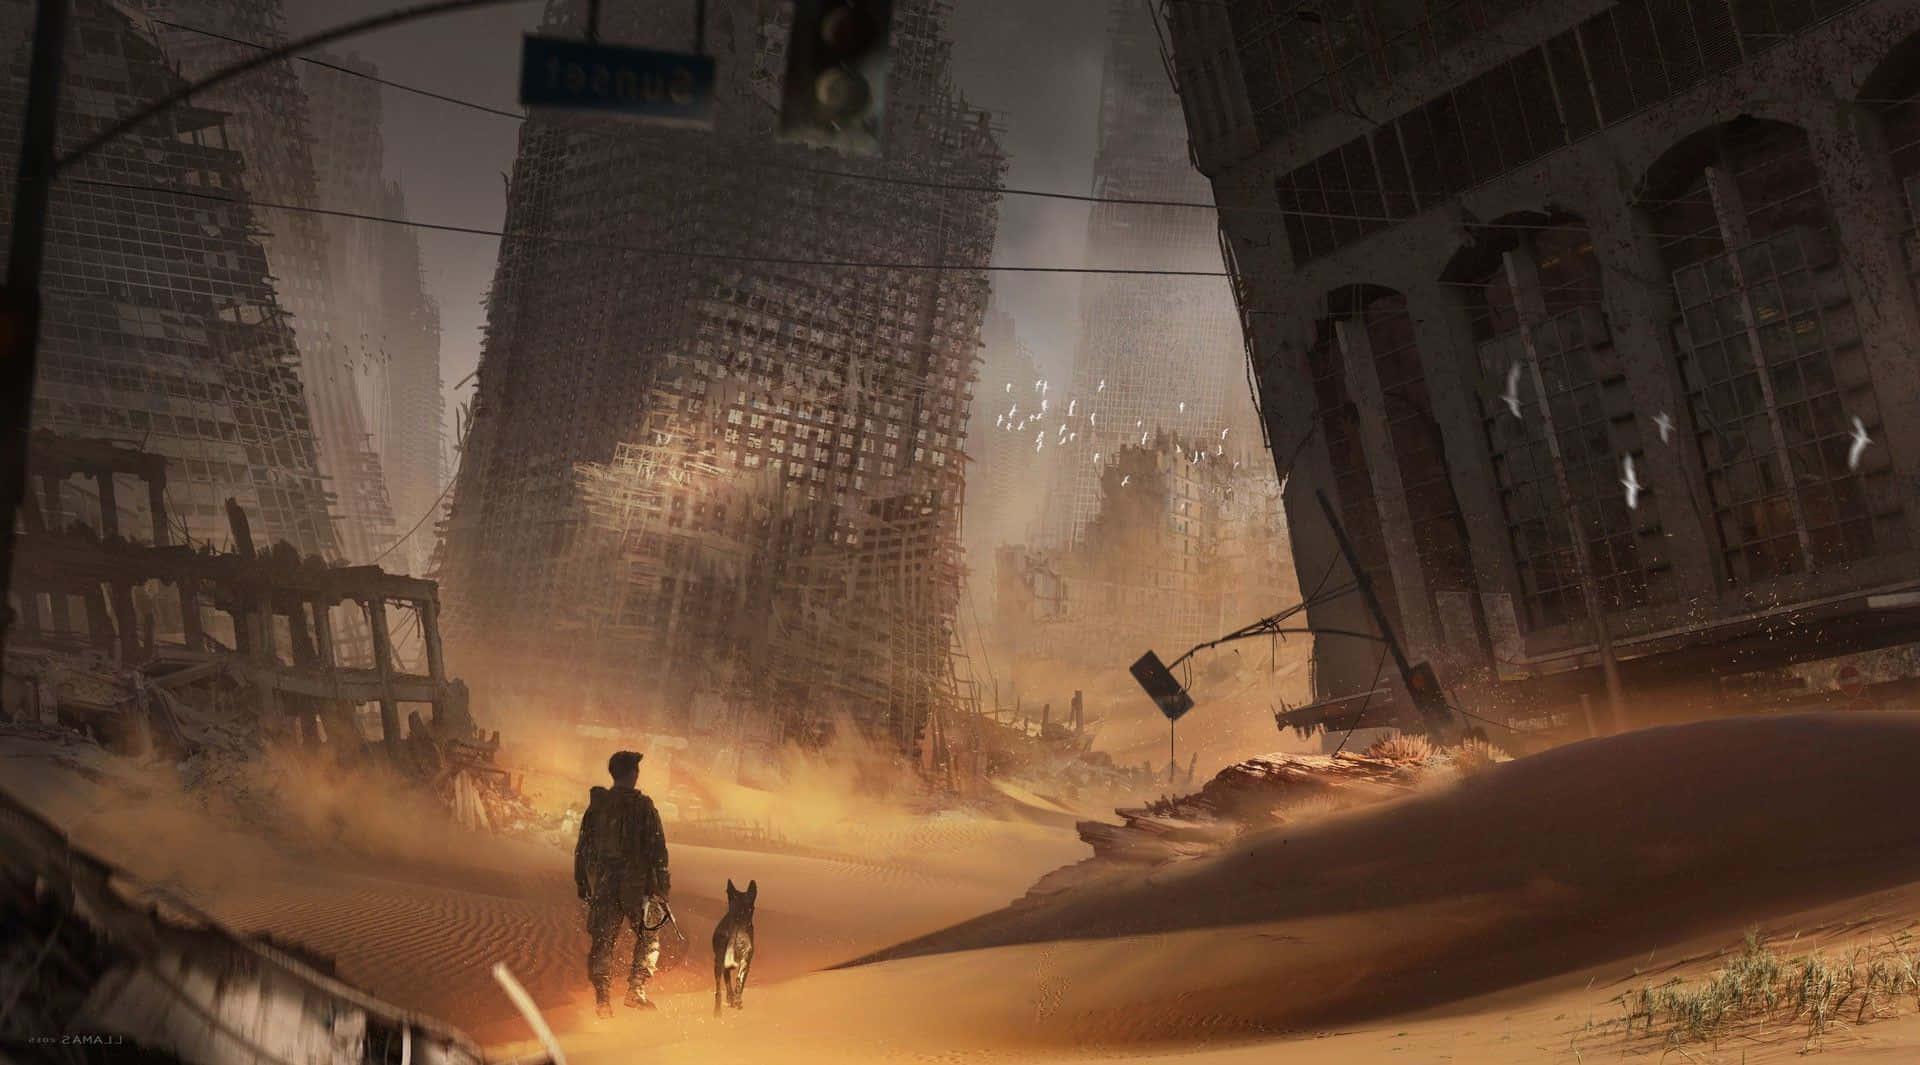 Post-Apocalyptic Adventure in Fallout 4 Wasteland Wallpaper